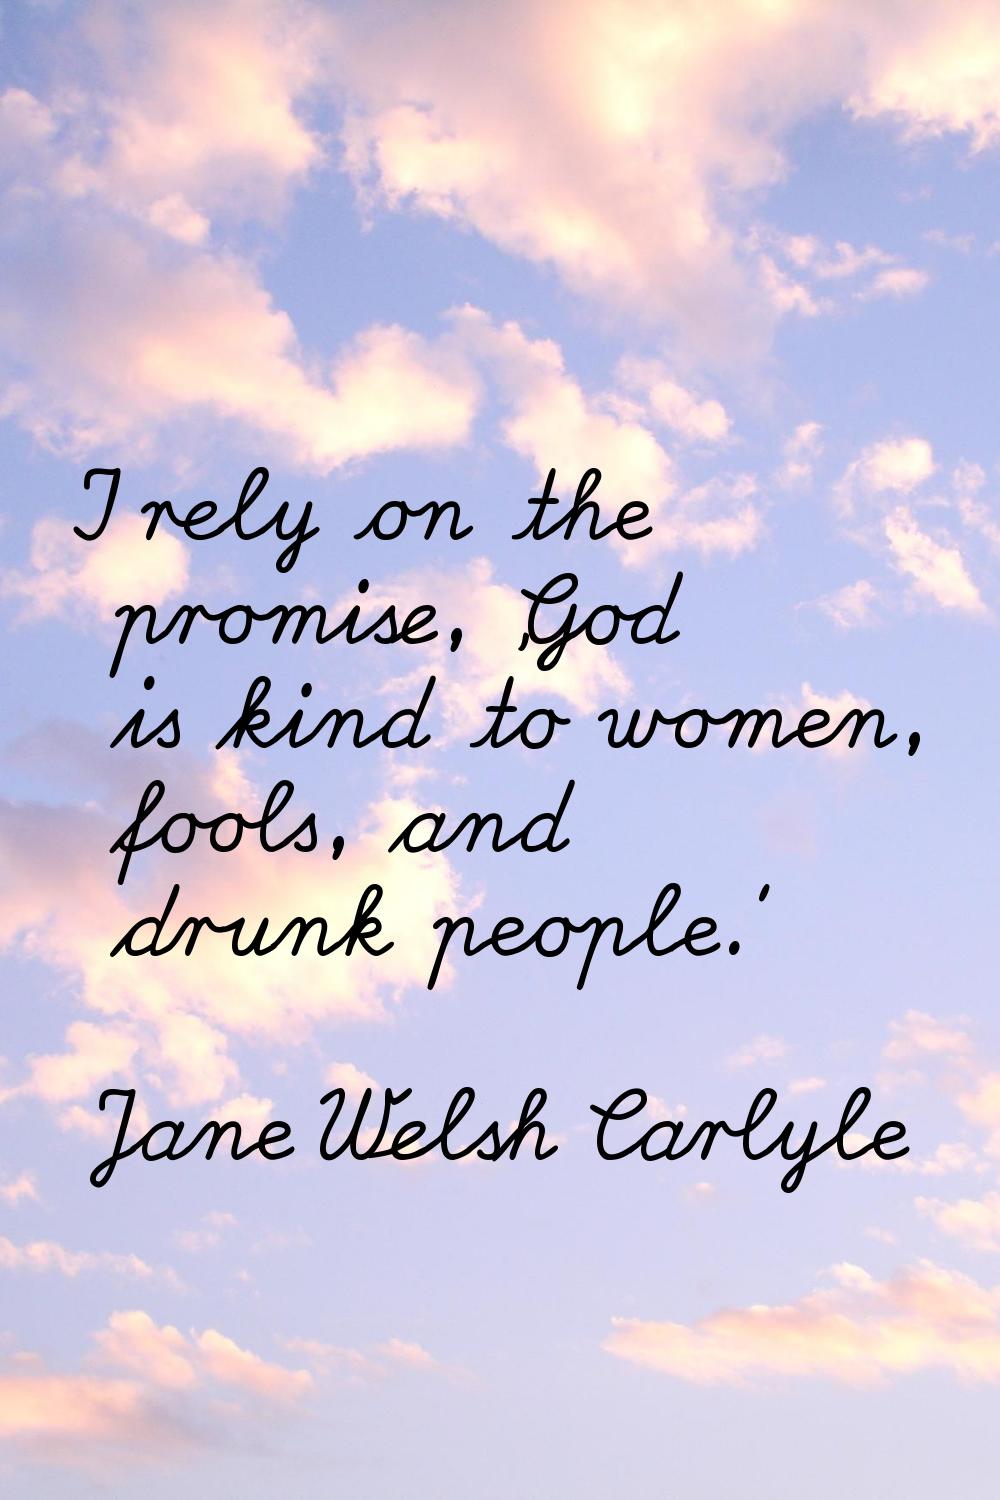 I rely on the promise, 'God is kind to women, fools, and drunk people.'